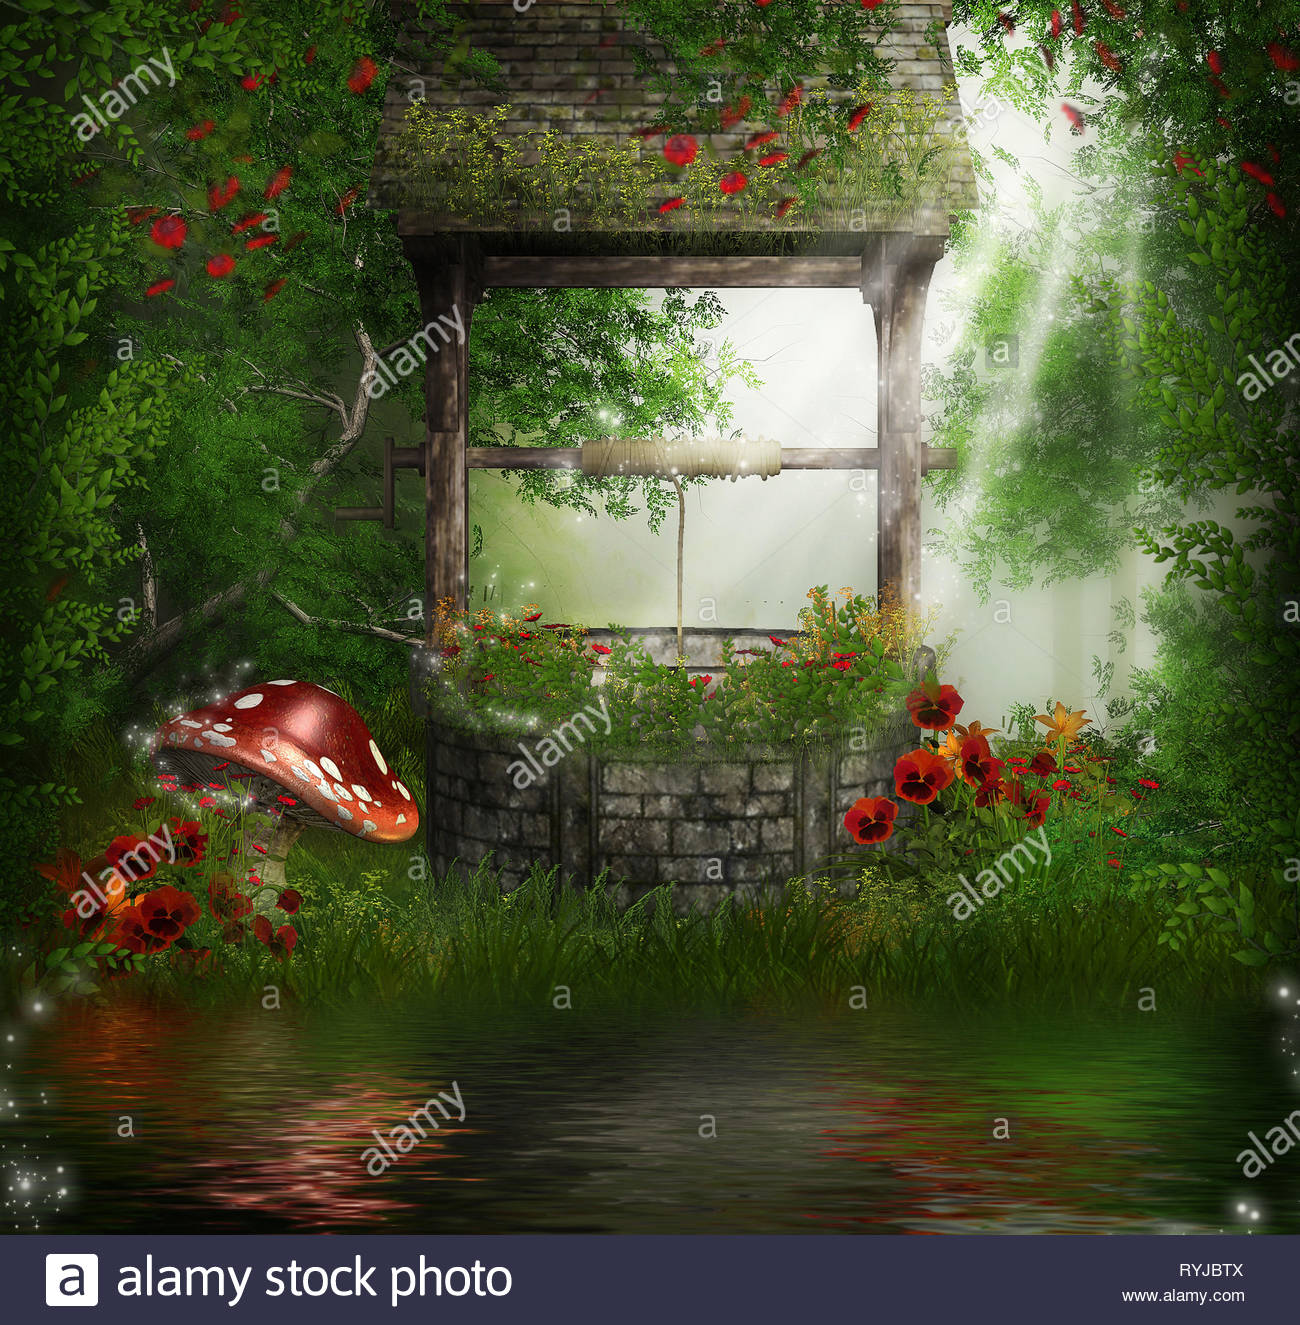 3d Illustration Fantasy Graphic Background Of A Stone Well